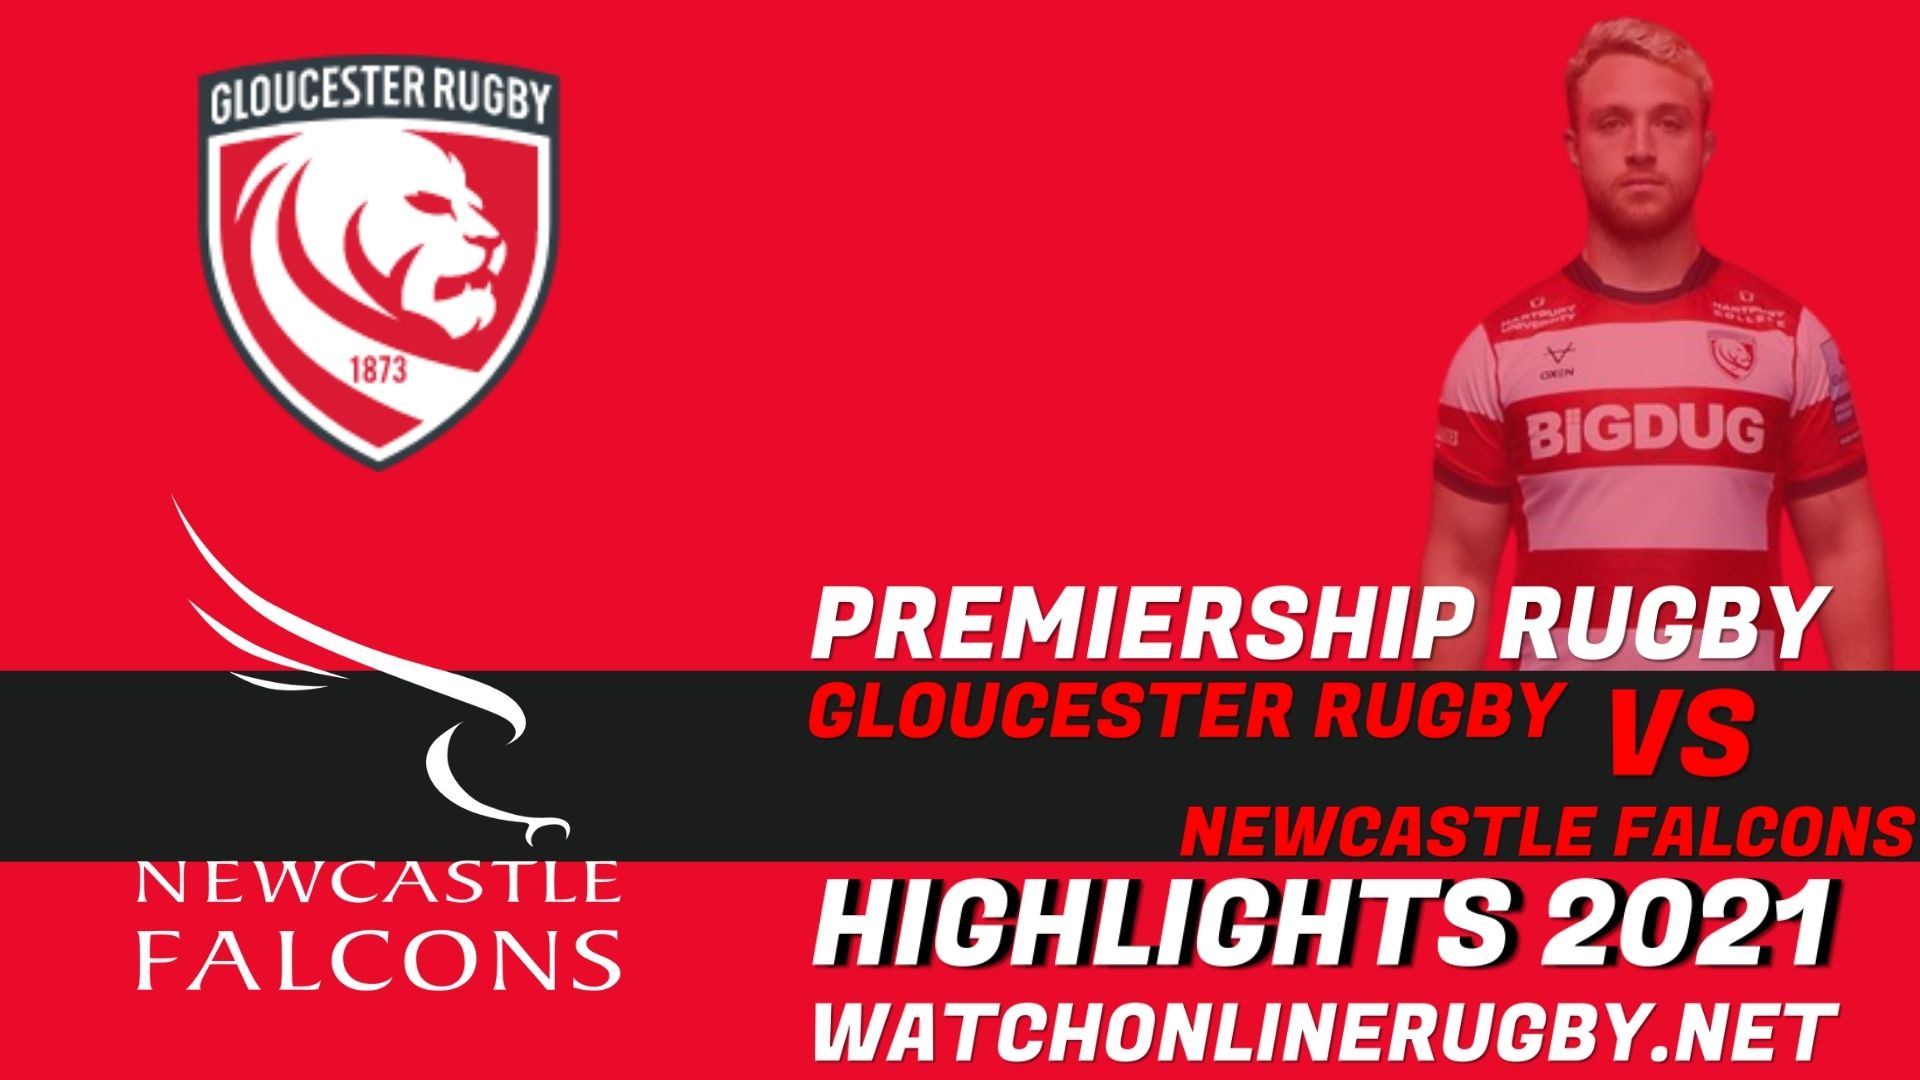 Gloucester Rugby Vs Newcastle Falcons Premiership Rugby 2021 RD 6